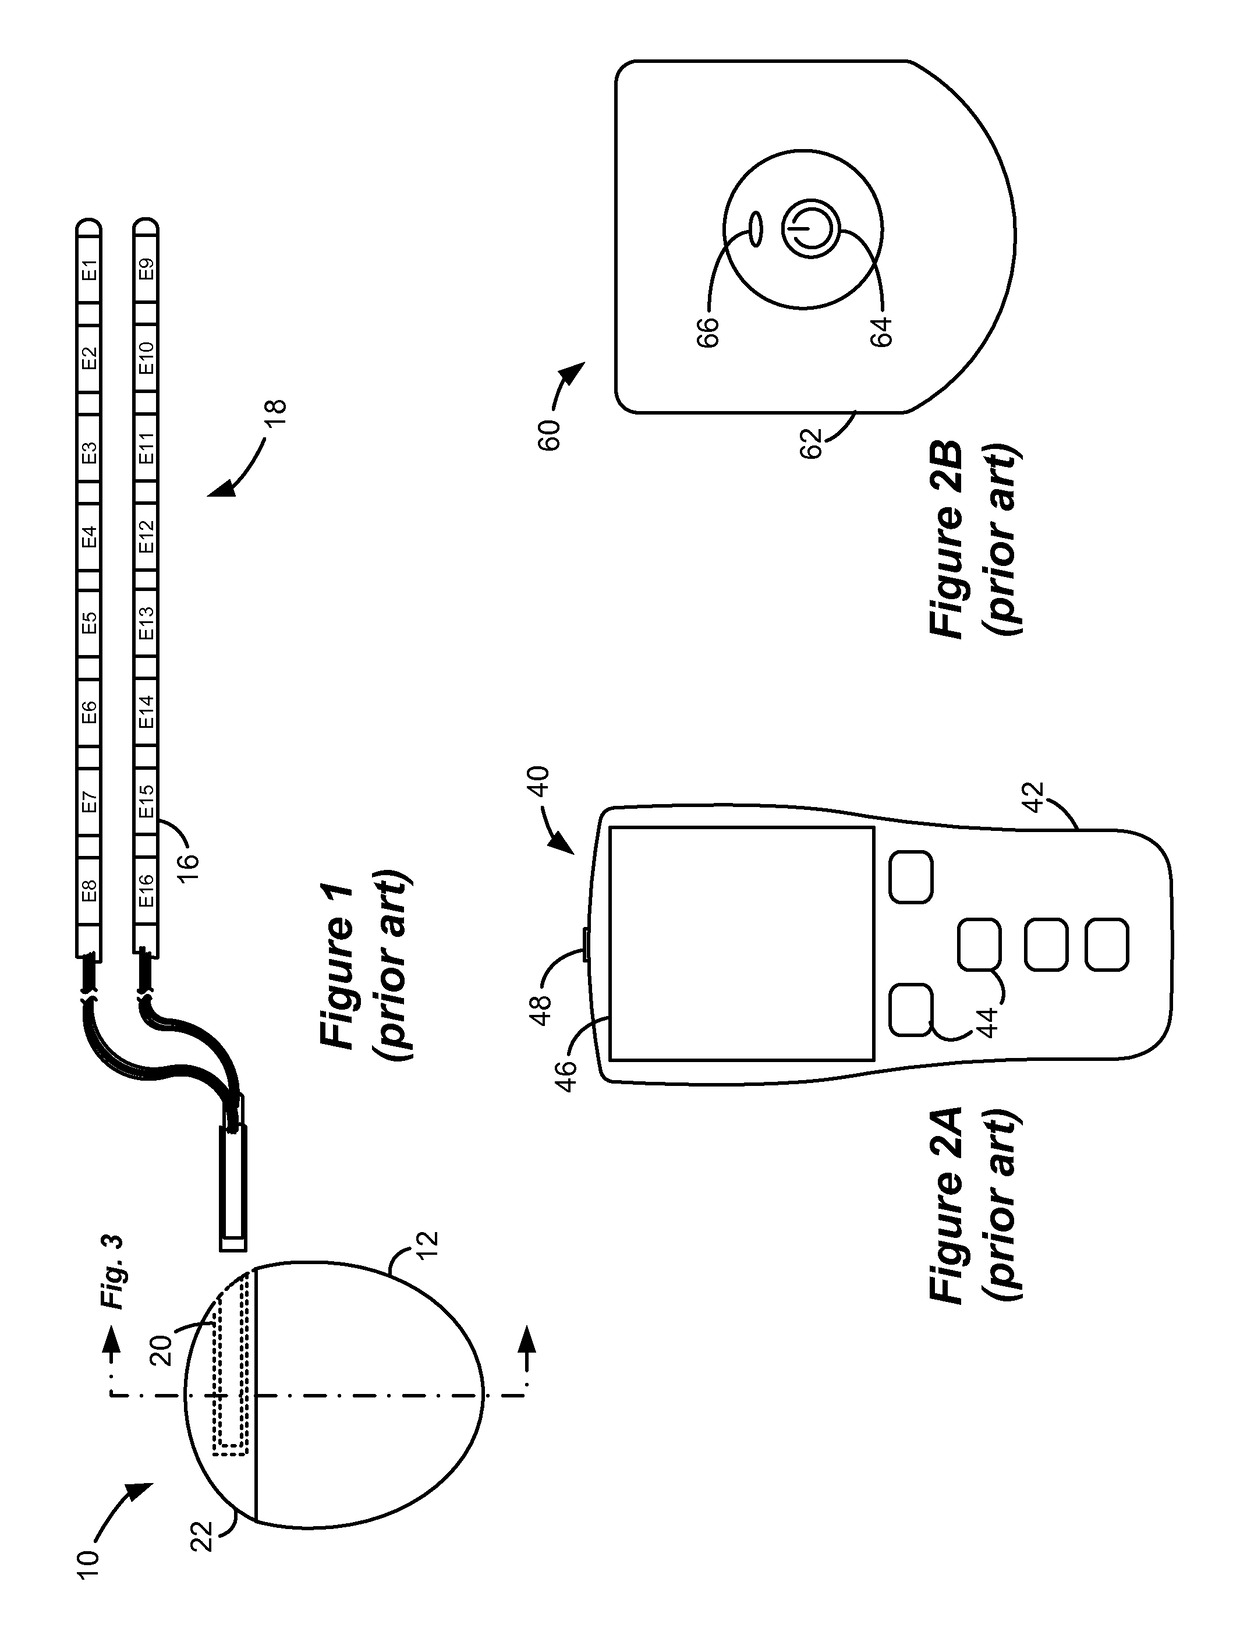 External charging coil assembly for charging a medical device